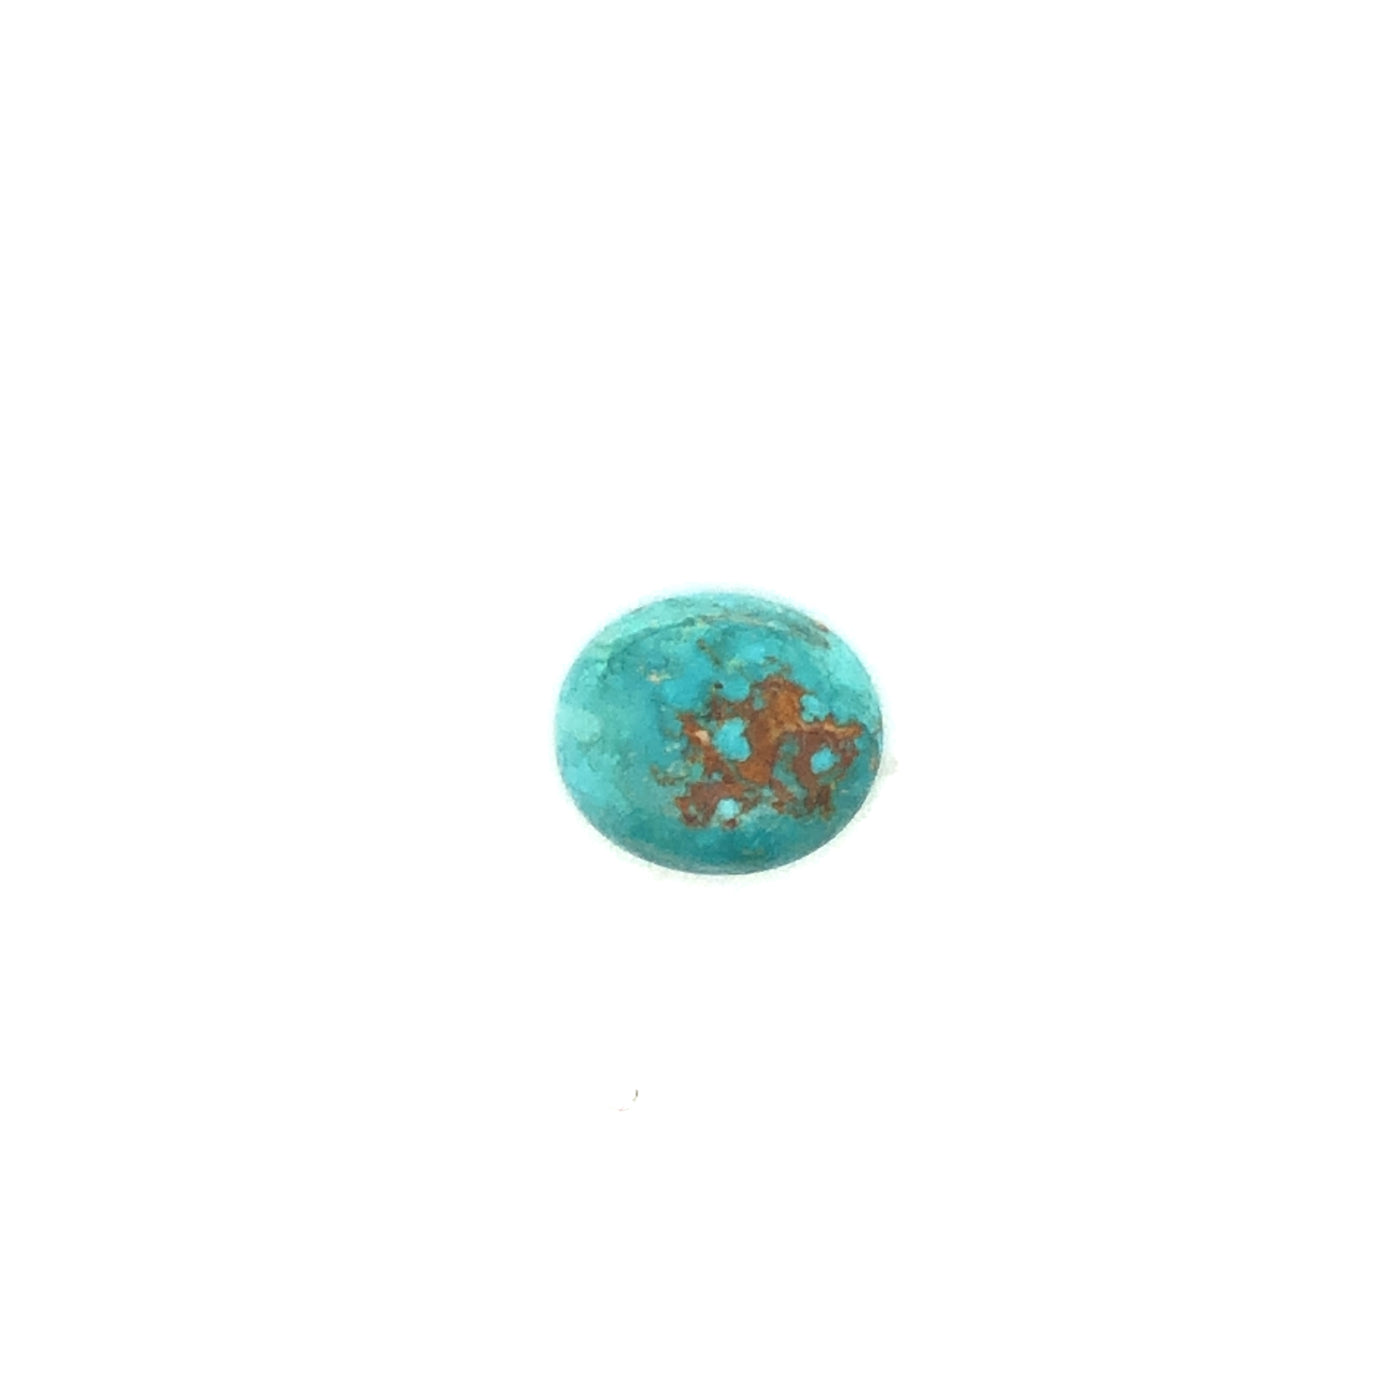 Loose Narooma Turquoise Oval Shaped 7.04Ct Blue With Some Brown